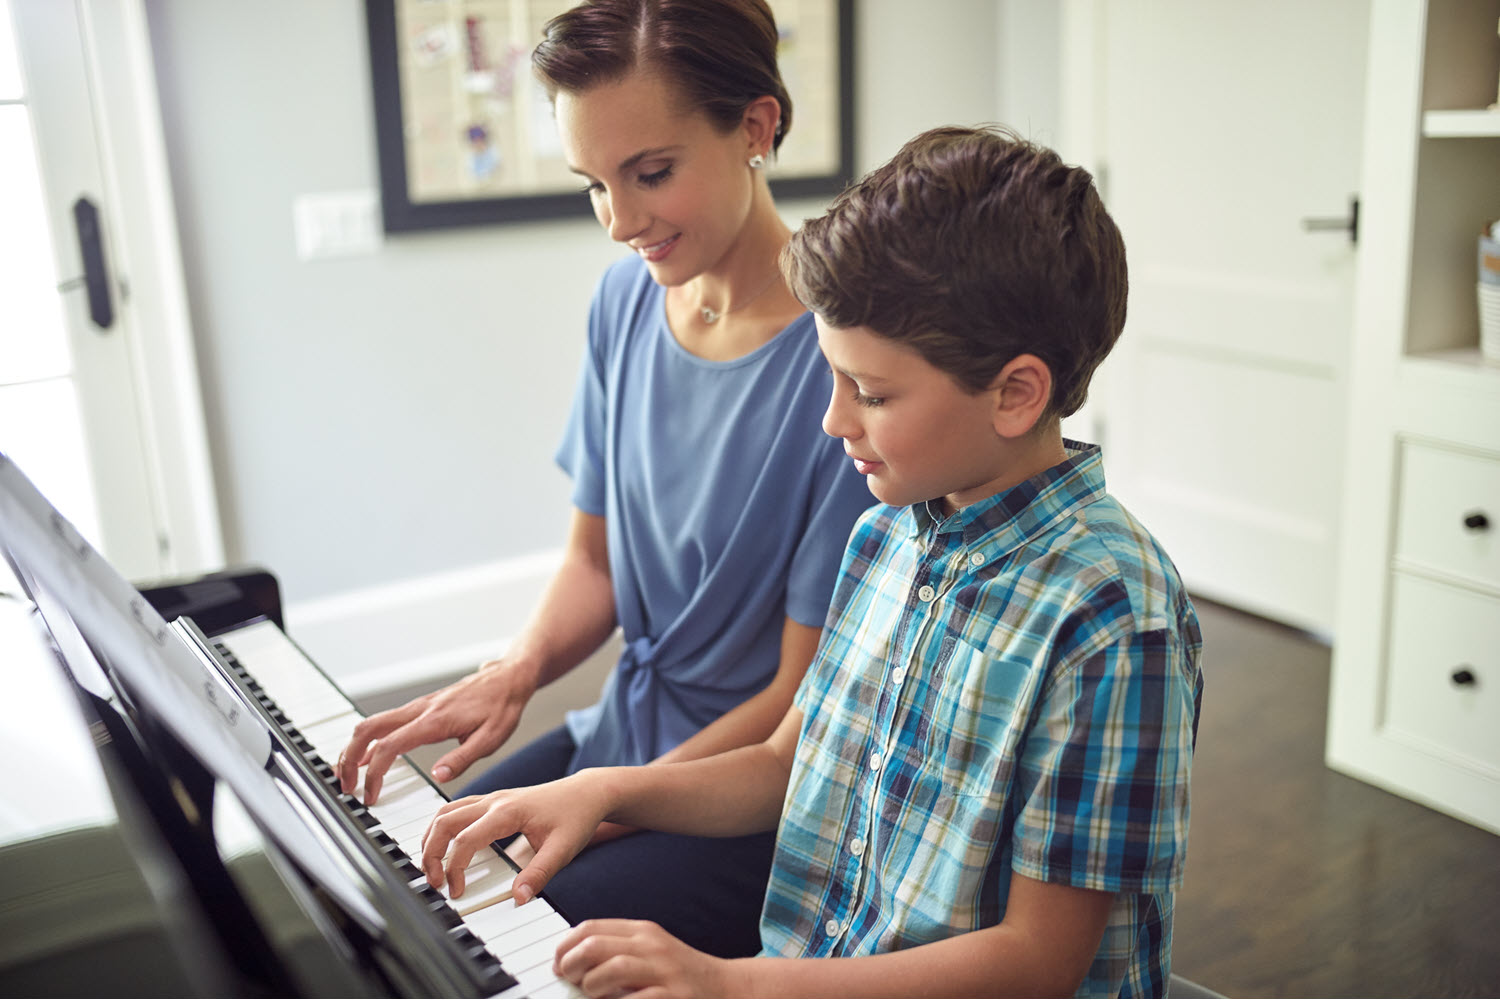 Mother and son side by side at piano.